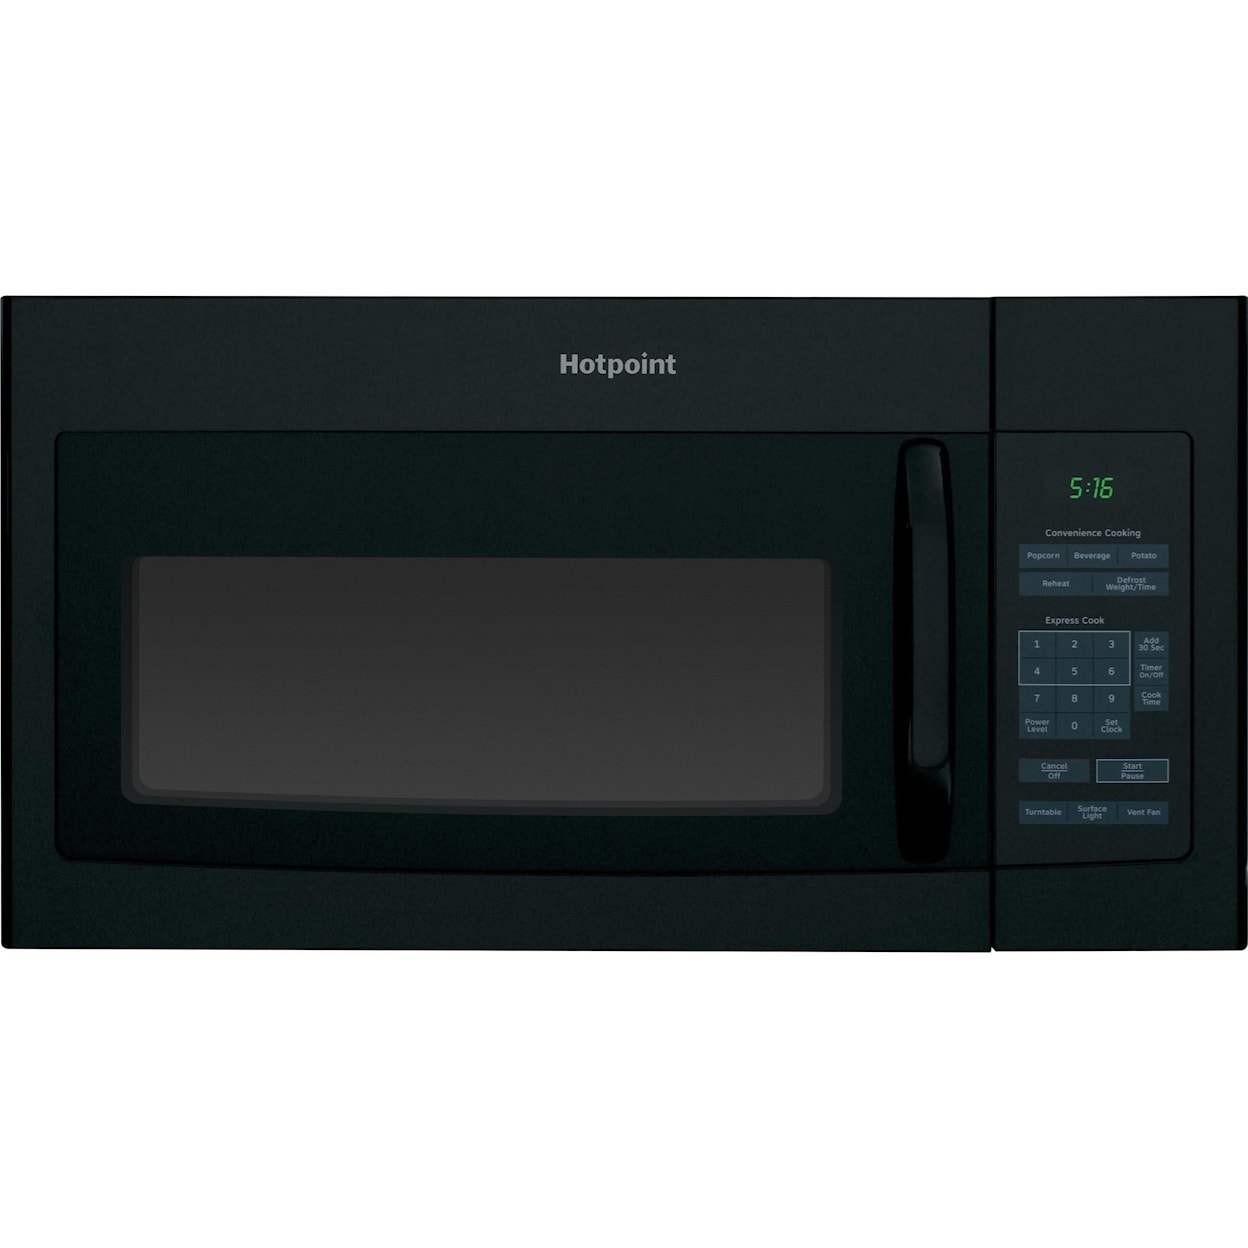 GE Appliances Hotpoint Microwave Oven Hotpoint® 1.6 Cu. Ft. Microwave